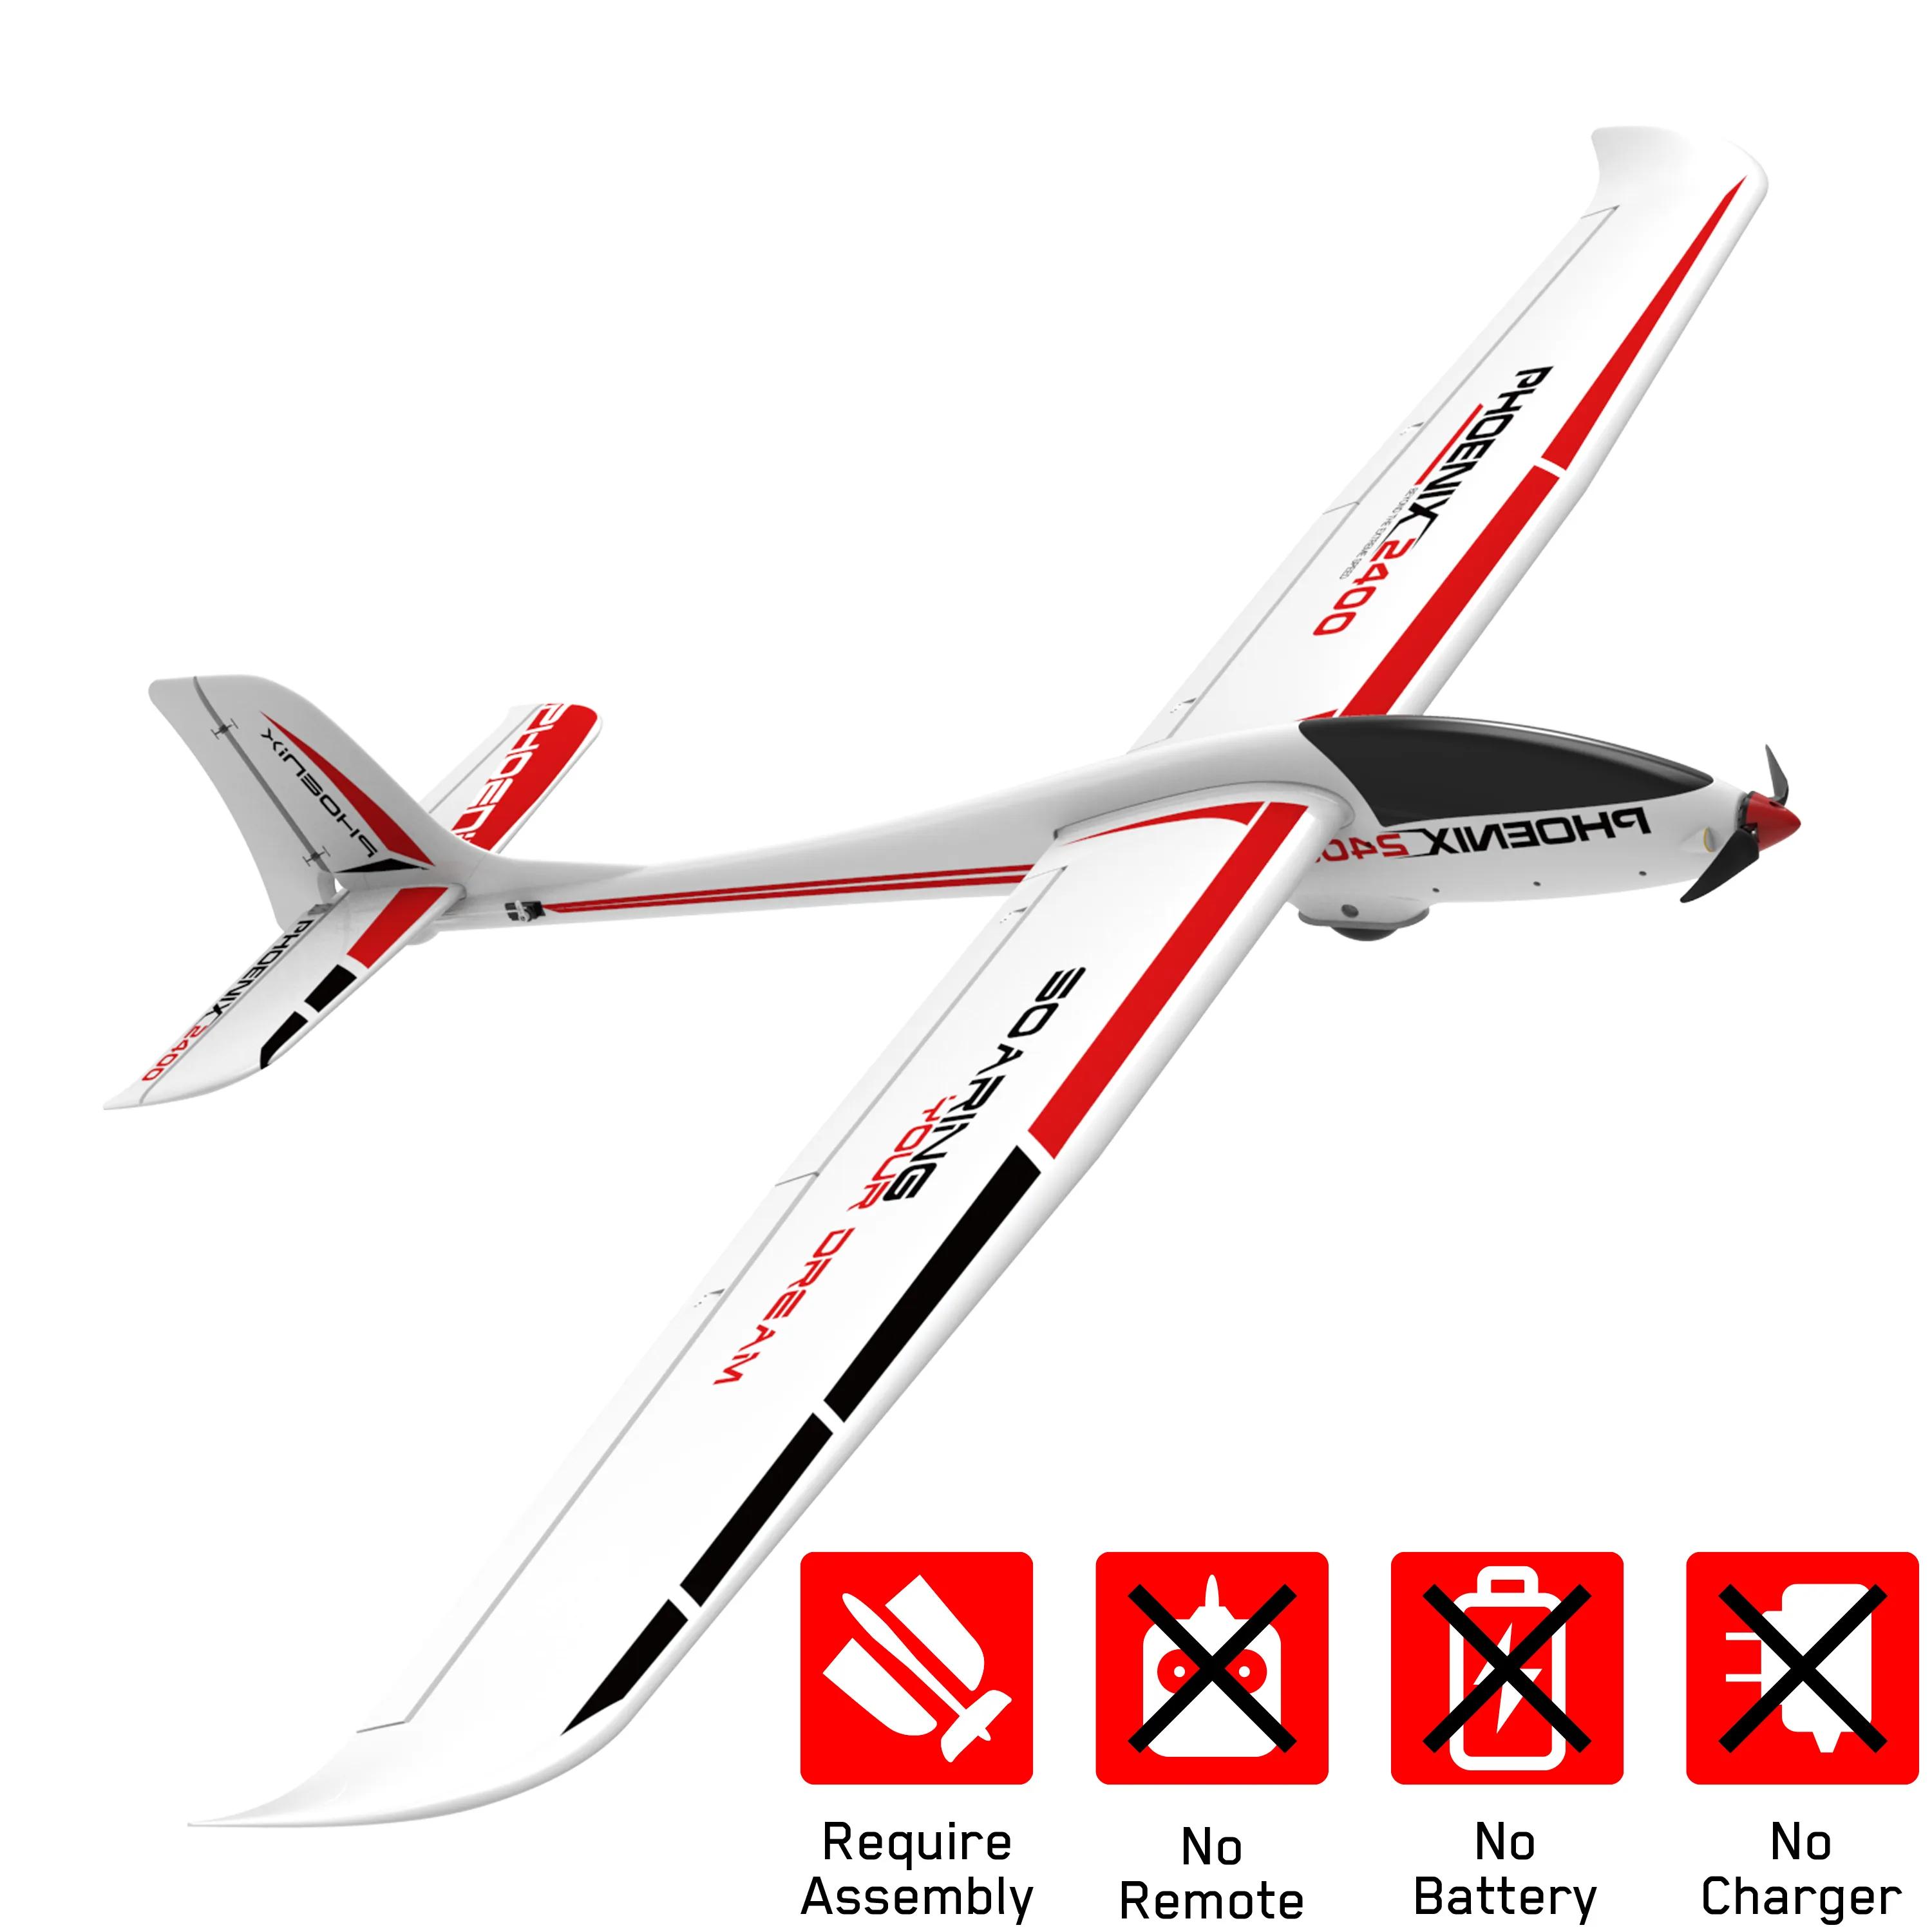 Phoenix 2000 Rc Glider: High Performance RC Flying Experience Guaranteed